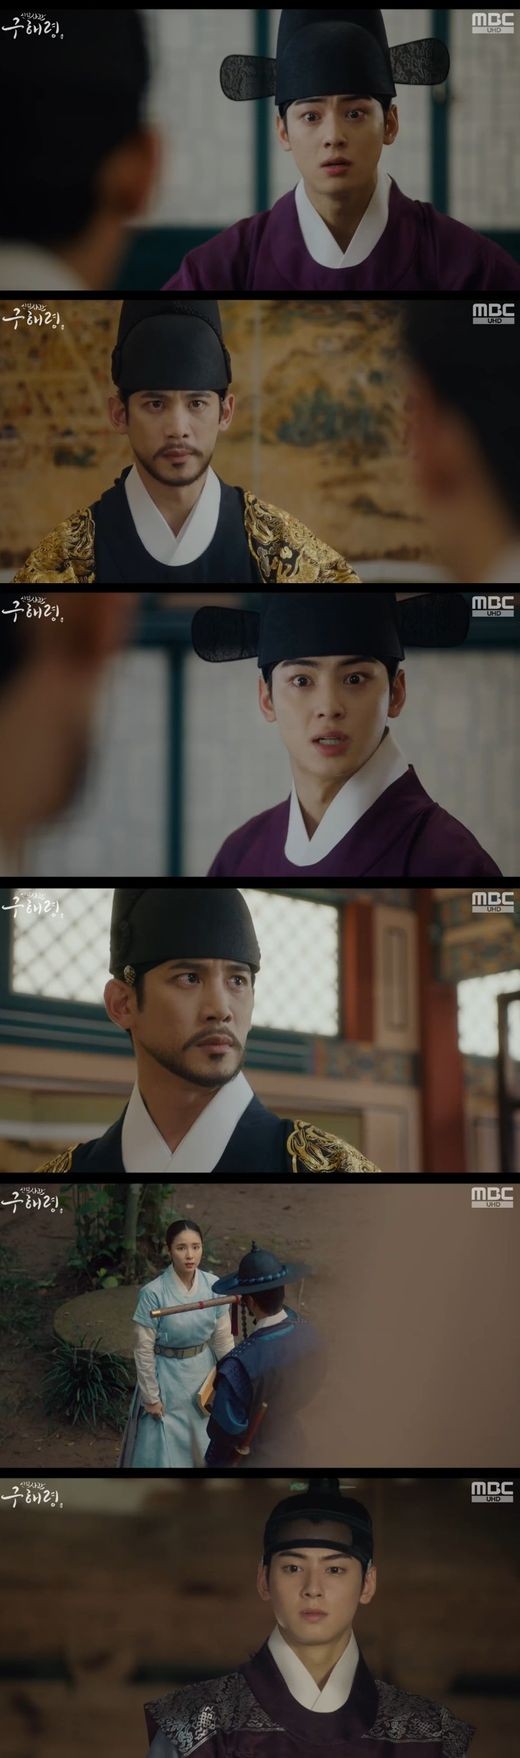 Cha Eun-woo was detained in meltdown sugar by Park Ki-woong.In MBCs Rookie Historian Goo Hae-ryung broadcast on the 25th, Lee Jin (Park Ki-woong) ignored the appeal of Rookie Historian Goo Hae-ryung (Shin Se-kyung) and was shown confinement of Lee Rim (Cha Eun-woo).On this day, Rookie Historian Goo Hae-ryung tried to reveal the truth of the closing incident that history hid, but Min Woo-won (Lee Ji-hoon) said, It is not a matter of a military officer.The reason is that innocent people can suffer damage.Rookie Historian Goo Hae-ryung confronted such a Minwoowon, saying that the real innocent were the stigmatized kings and executed loyalists.Min Woo-wons father, Min Ik-pyeong (Choi Deok-moon), was the main driver of the anti-death case. Nevertheless, Min Woo-won said, I wasnt just a recorder from the beginning.We do what we have to do as a cadet. The truth of the evils shocked the officers. The beginning of the rebellion was the rebellion. However, this rebellion was replaced to make it a justification for the rebellion.Rookie Historian Goo Hae-ryung appealed to the tax collector Lee Jin, and Min Woo-won recited the appeal in front of the deputies.Rookie Historian Goo Hae-ryung said, The living officers want to correct false history and convey it to later generations.I want you to tell me the truth about who the Diary Office is, who has changed history and threatened the officers, who has abandoned his beliefs and who has been in power.When asked, What does that mean? Min asked, Its a full and fair investigation, not a single ladys will, but a whole presbyterians will.The archaeology of the archaeologist also says, It is also true of the officers. They want to leave their history to their descendants.If it happened at the diary, should not you be sure whether it is true? Lee Jin did not feel good.Do not Chungha anymore about this, he said.This means that he turned his back on Lee Jin officers.So Baek-sun (Kim Myung-soo) made a positive observation, saying, There is no reason to touch the peoples reputation of the world as long as the officers have the beginning of the Yemunkwan, but Koo Jae-kyungs opinion was different.Min said, I dont think it matters to the people, and I fear that they will threaten the court even if they use force. So Baek-sun said, If you do that, there is no better cause.If he harms his officers, he will be punished by the public opinion. Rookie Historian Goo Hae-ryung revealed that he was the one who changed the secret of the lungs.Rookie Historian Goo Hae-ryung said, I dont blame my brother, though. I think there must have been a reason.For all those years, you have already received all the punishment just because you have been guarding me and taking care of me and being so sick and distressed alone.So its okay if you dont take that heavy hand now. Koo cried.Chungha or Lee Jin said, Why do you want to know the truth? You want to find out that the opposition is wrong?You are the son of the King, not the King, so do not forget your duty. Lee Jin said, What is my duty? A helpless and pathetic man who can not do anything in his prison? Lee Jin said, That is your duty.You cant do anything and you cant do it. Lee Jin also threw Leerim in the melted-down hall and foreshadowed the blue.